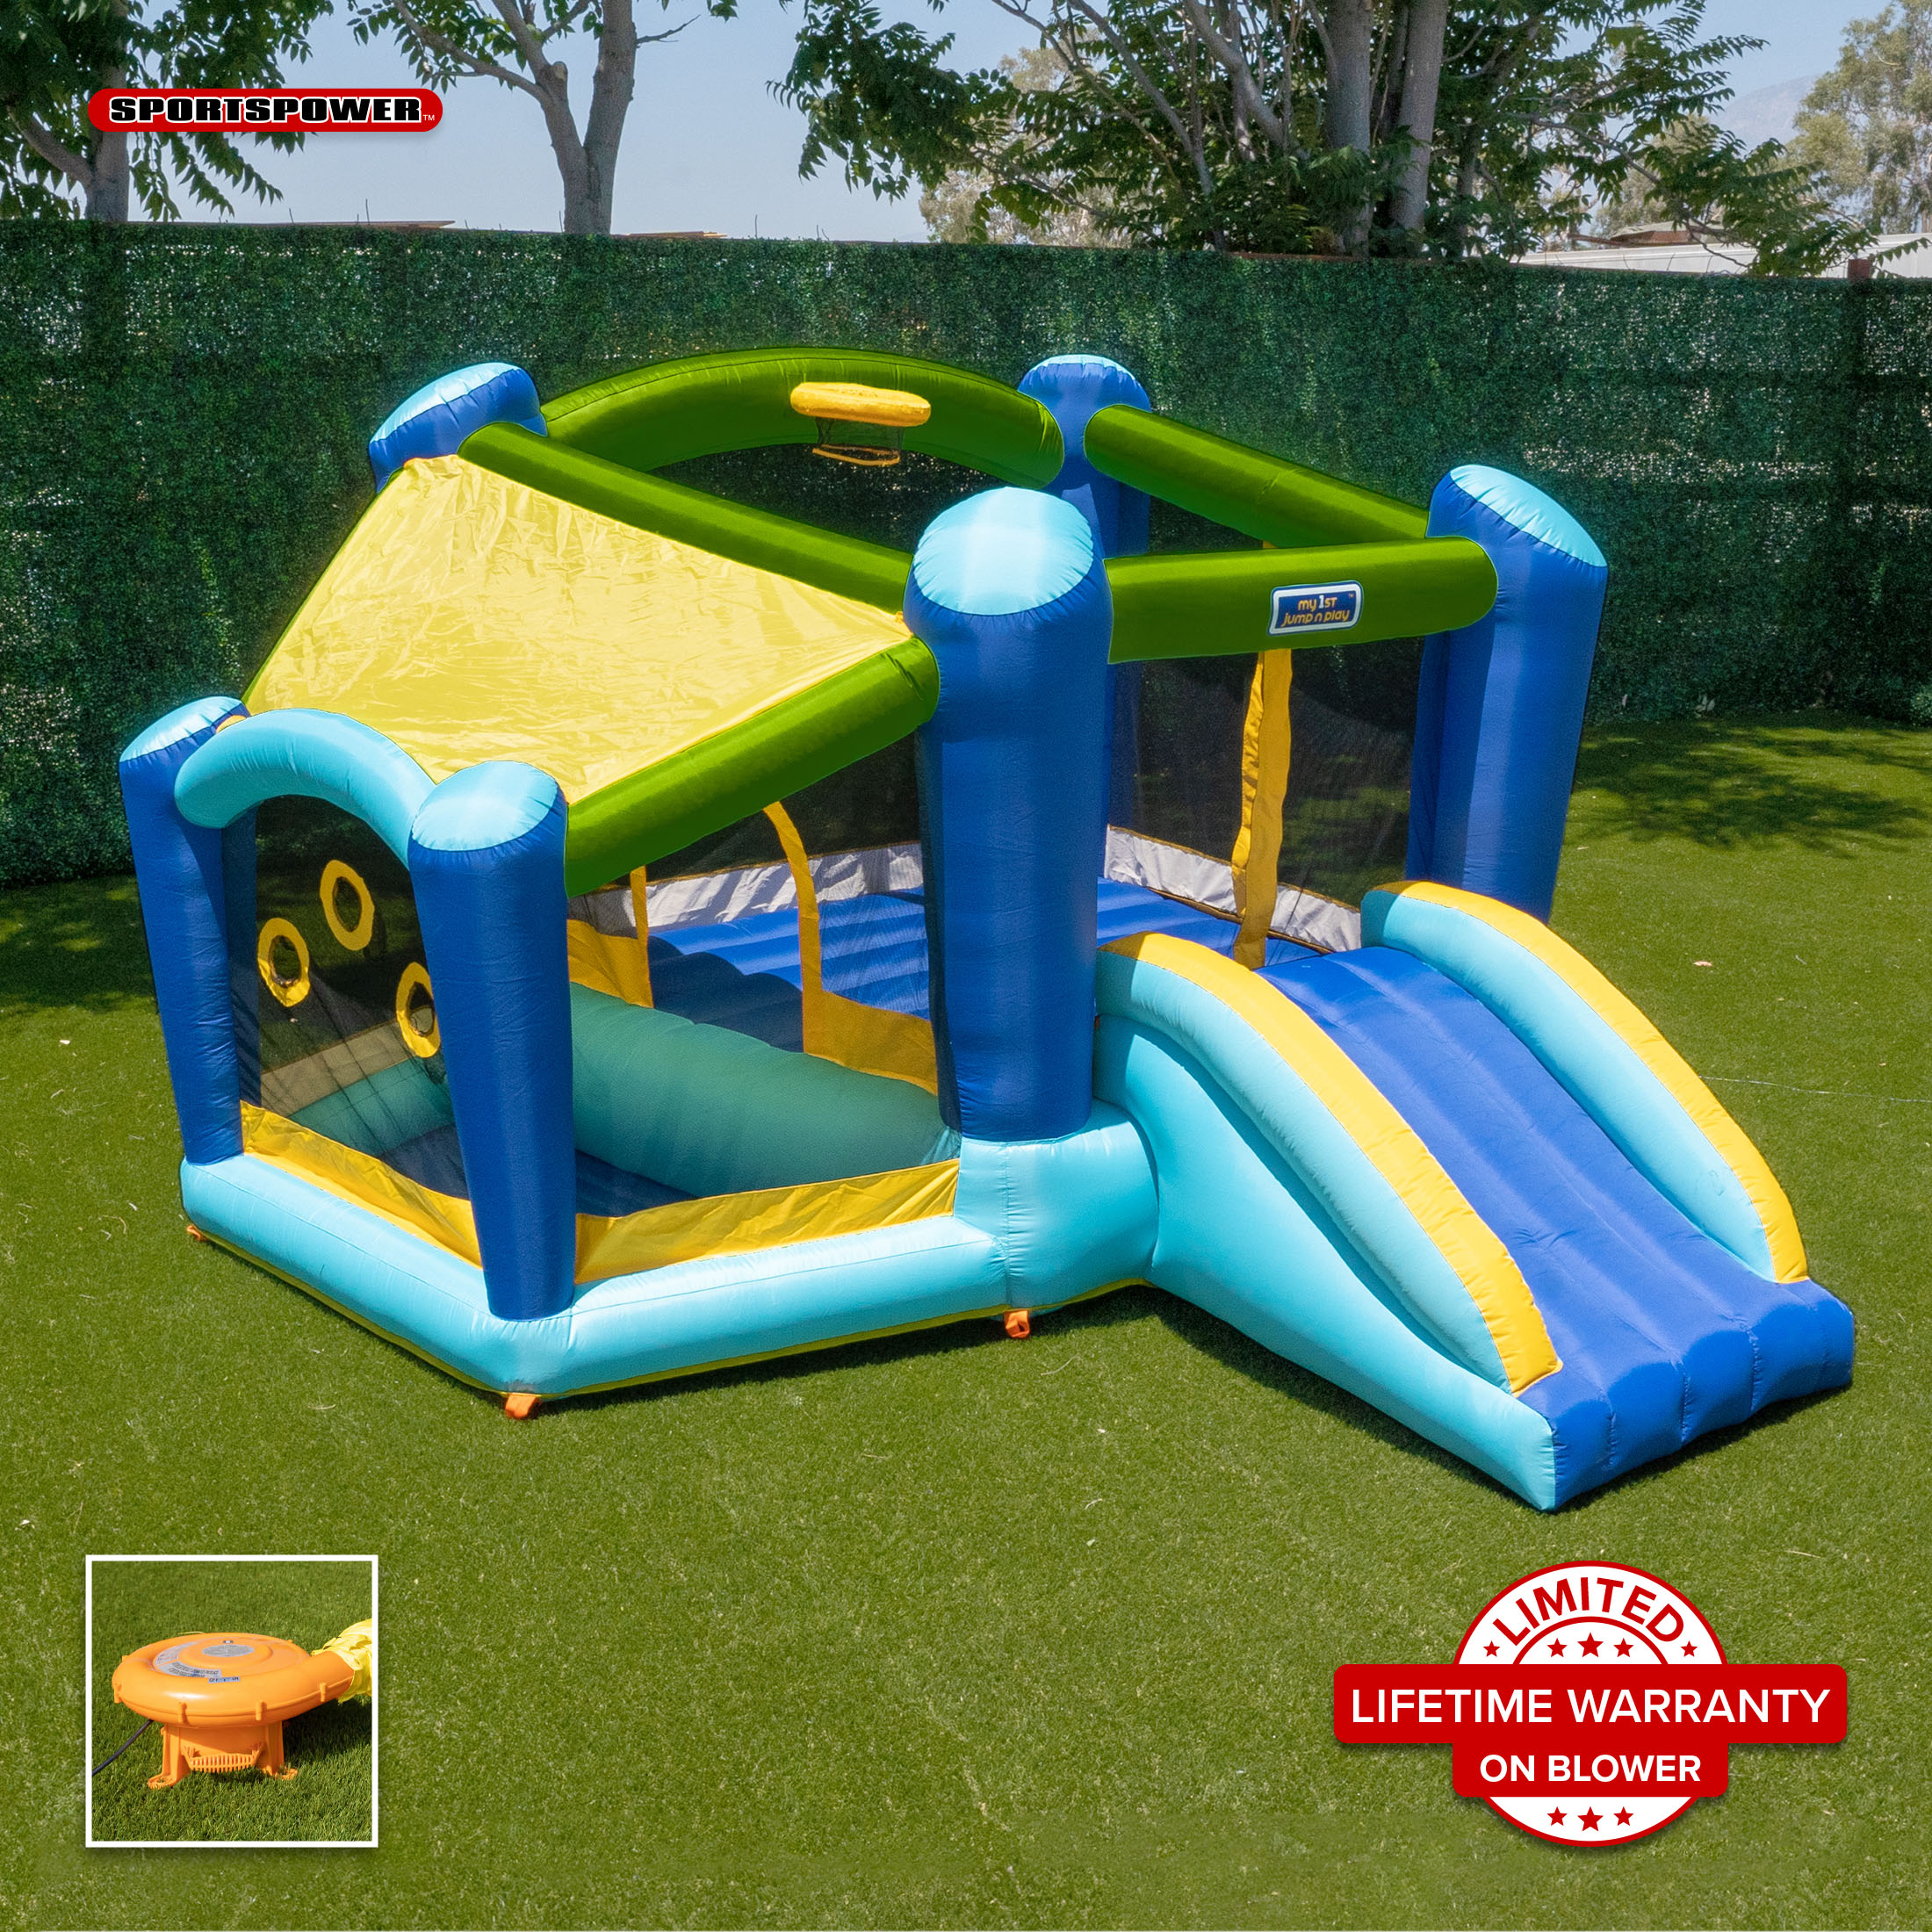 Sportspower My First Jump 'n Slide Bounce House with Ball Pit & with Lifetime Warranty on Heavy Duty Blower - image 1 of 10